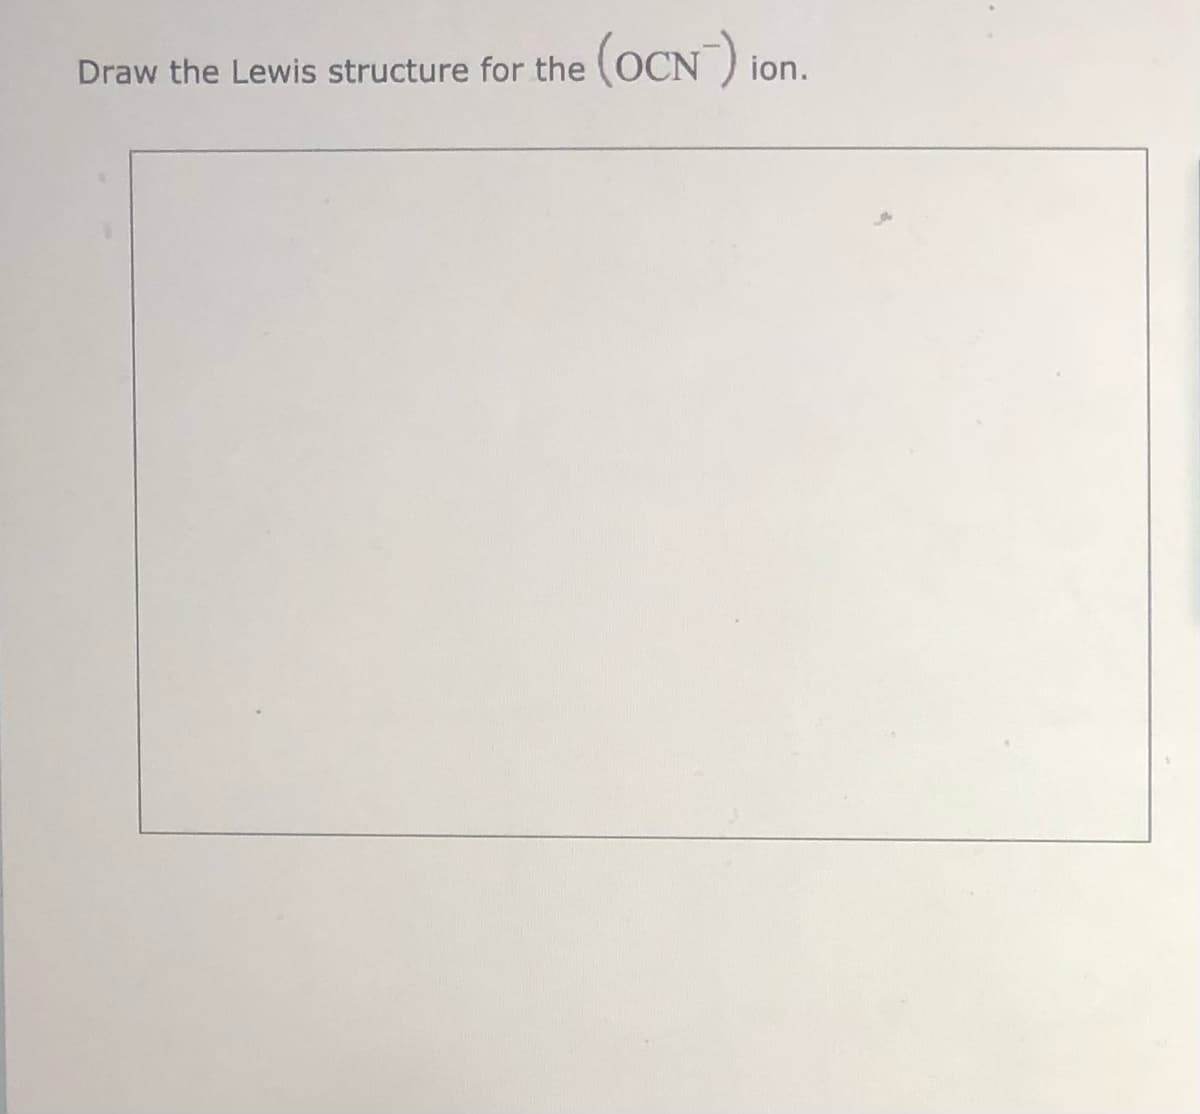 Draw the Lewis structure for the (OCN ion.
